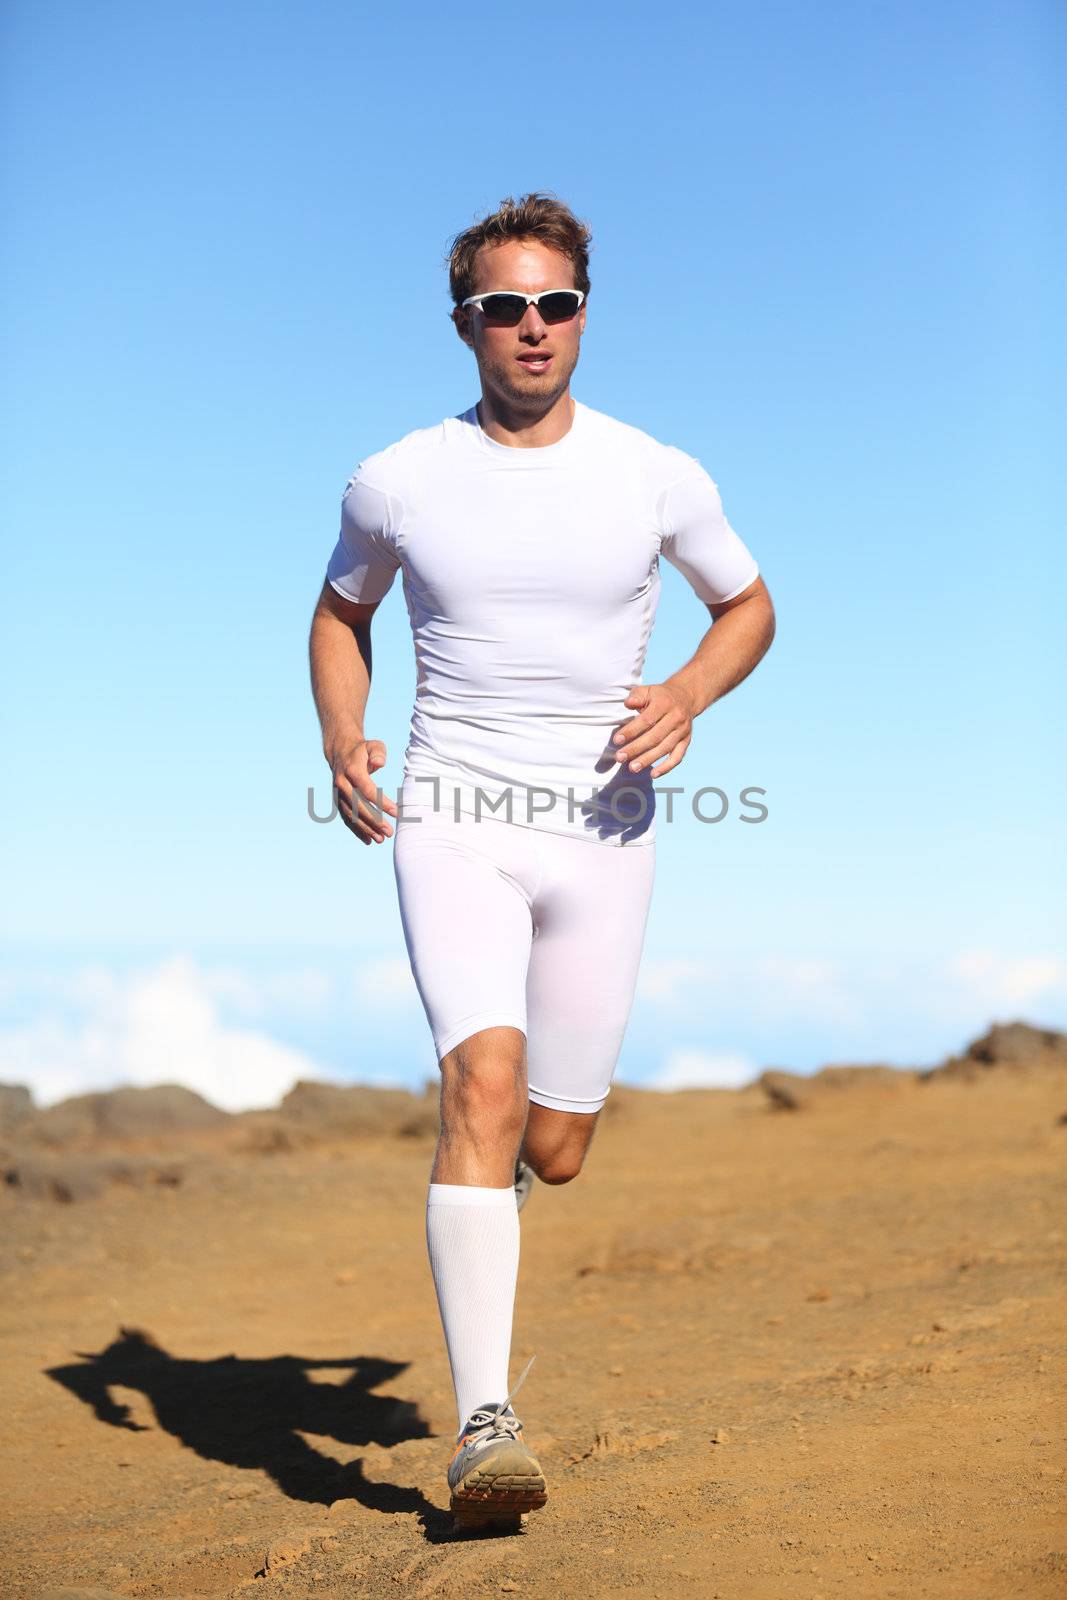 Athlete sports fitness runner running outside in nature. Man training trail running in beautiful scenery for marathon run. Sporty fit athletic male working out in compression clothing.